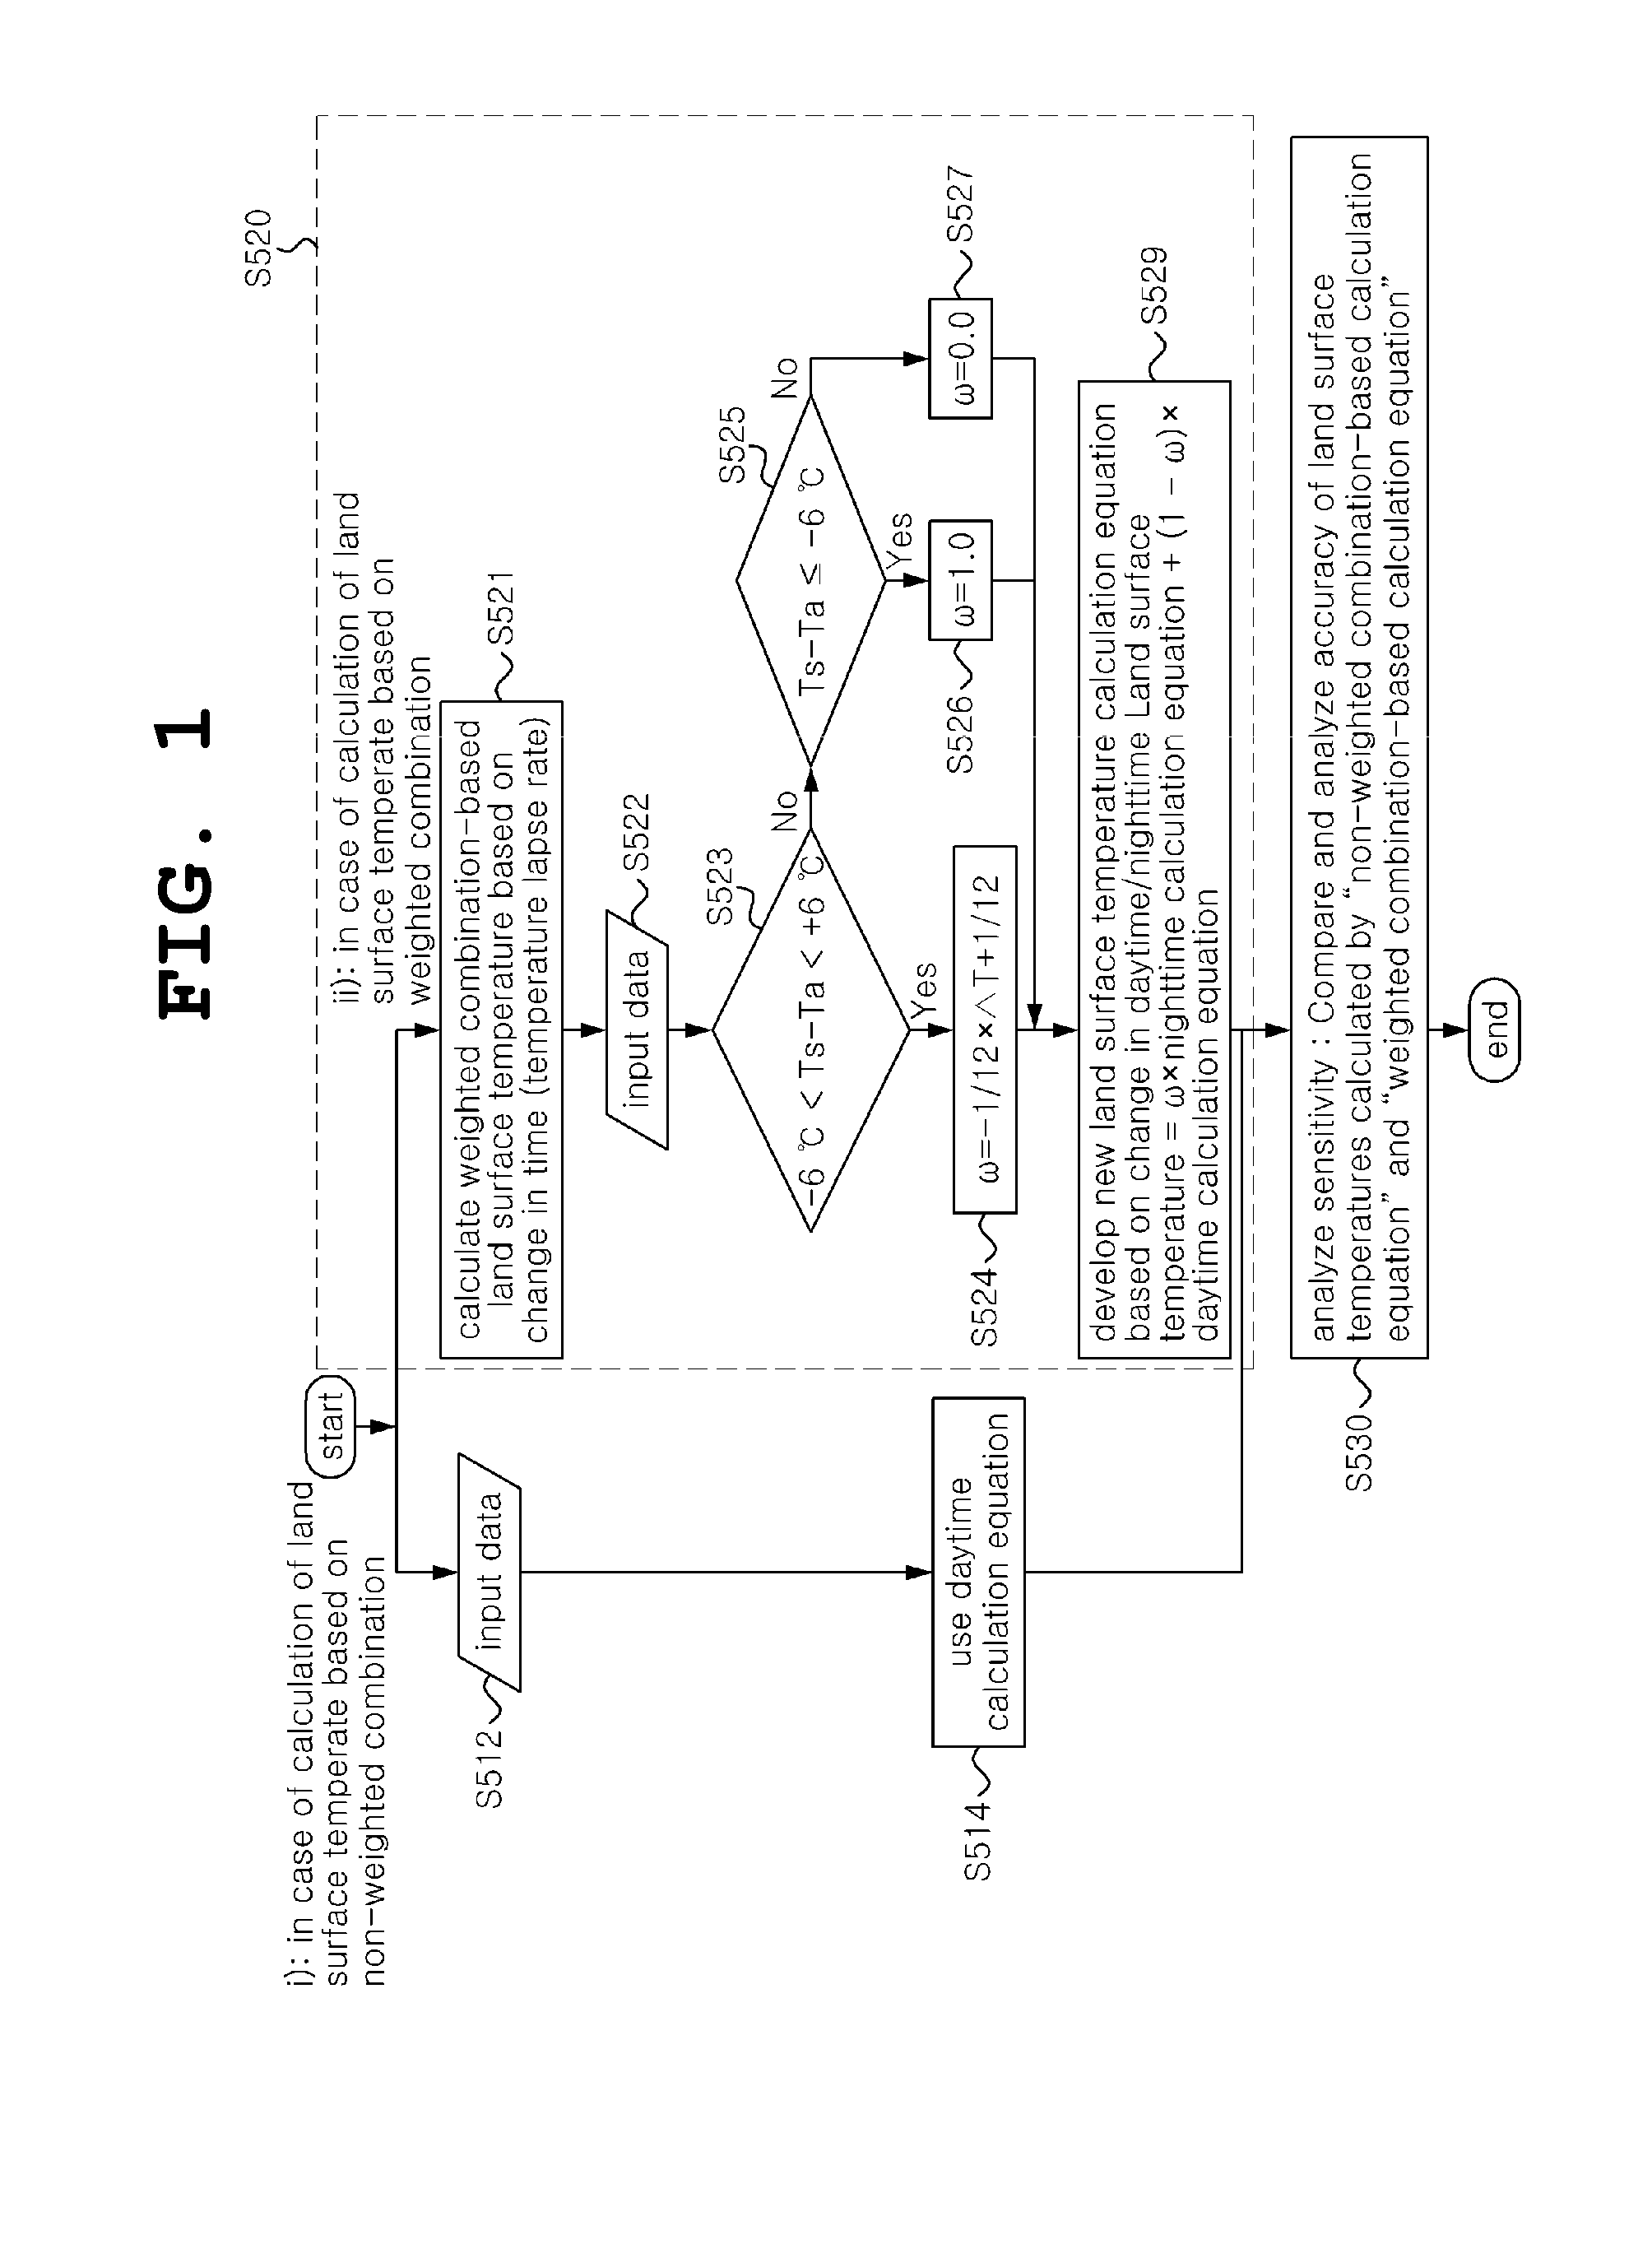 Method for estimating land surface termperature lapse rate using infrared image